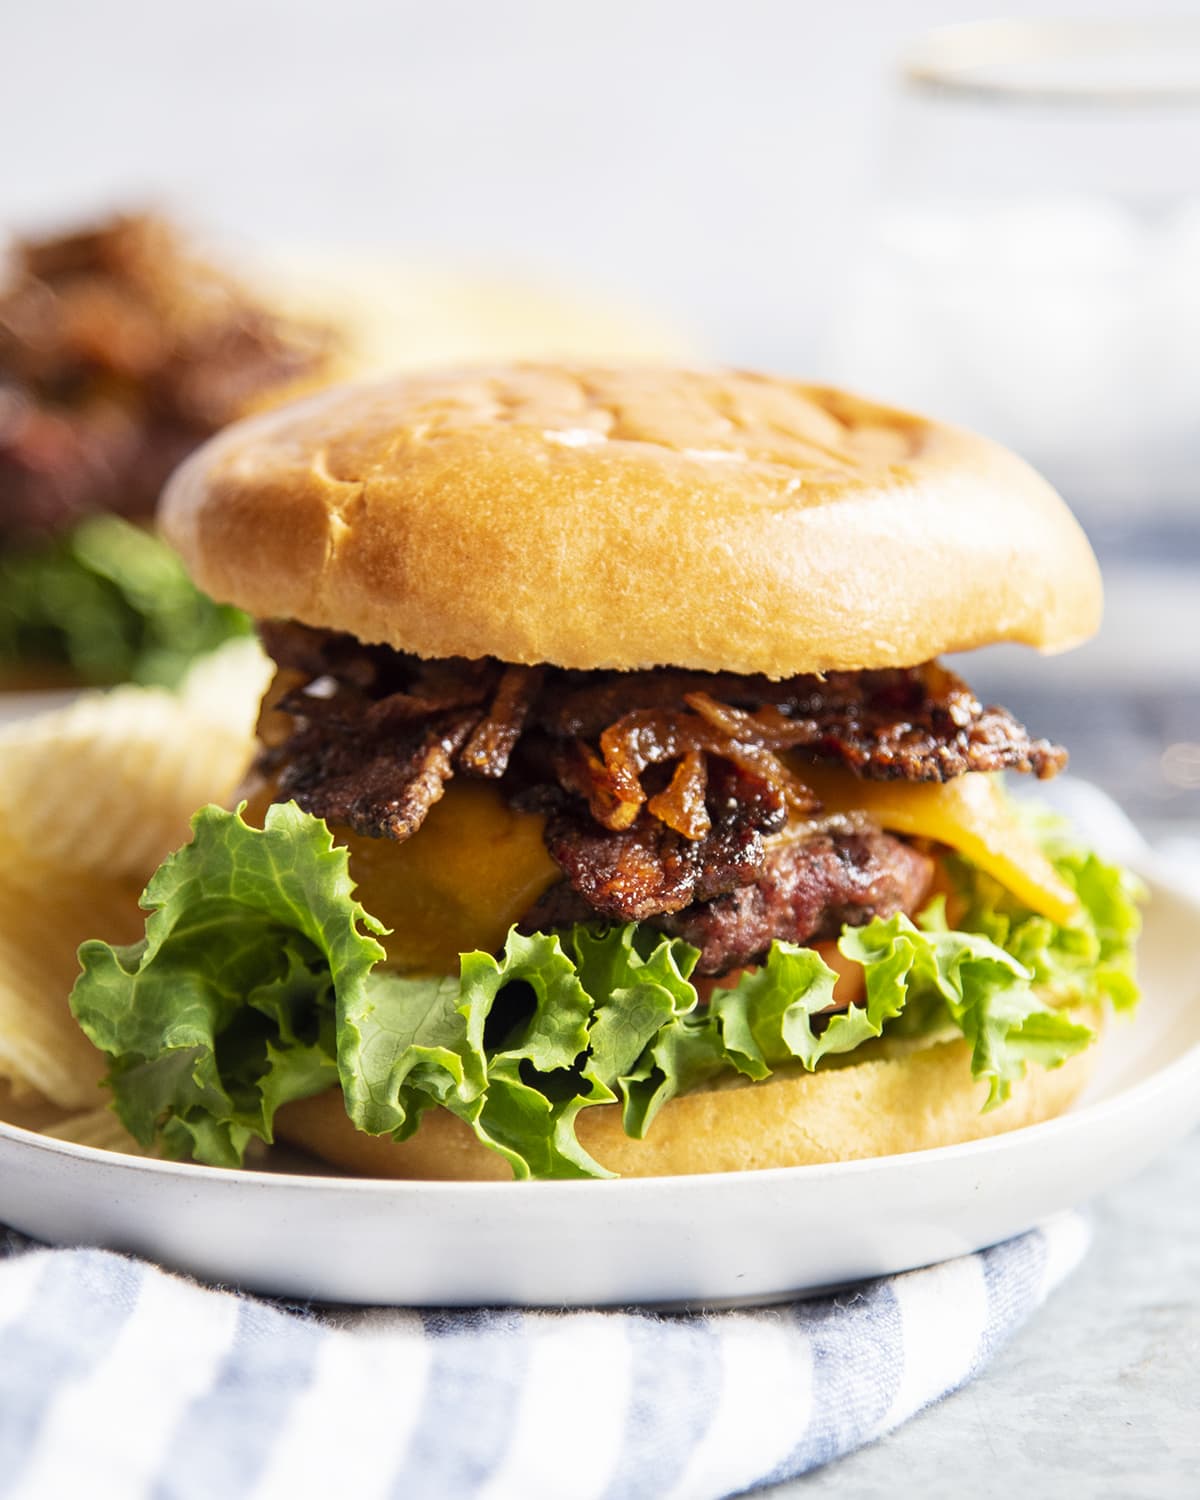 A cheeseburger topped with brown sugar bacon and caramelized onions on a white plate.